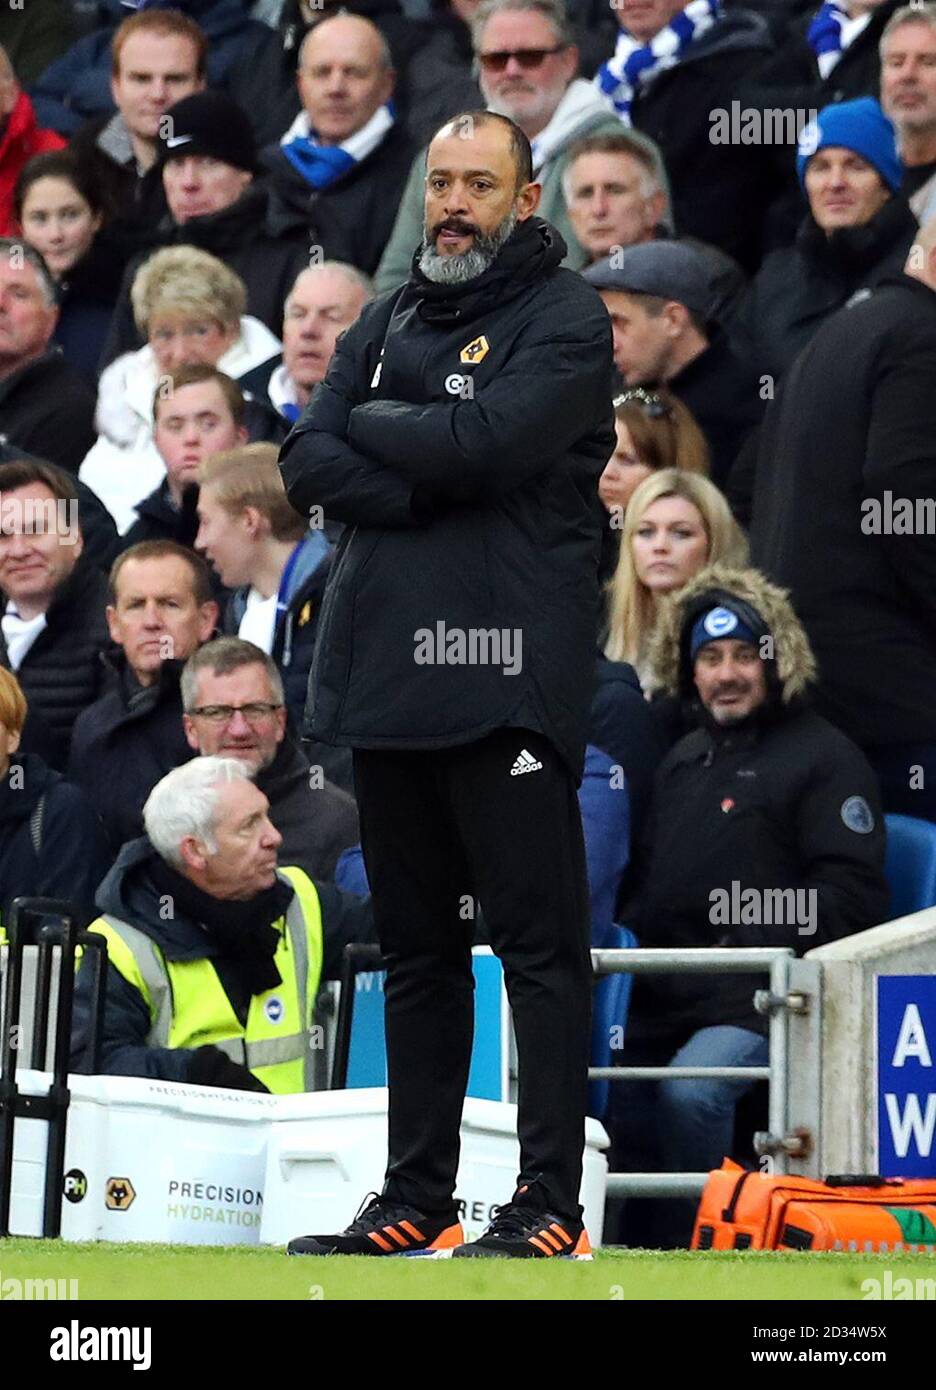 Wolverhampton Wanderers manager Nuno Espirito Santo during the Premier League match at The AMEX Stadium, Brighton. PRESS ASSOCIATION Photo. Picture date: Saturday October 27, 2018. See PA story SOCCER Brighton. Photo credit should read: Gareth Fuller/PA Wire. RESTRICTIONS: No use with unauthorised audio, video, data, fixture lists, club/league logos or 'live' services. Online in-match use limited to 120 images, no video emulation. No use in betting, games or single club/league/player publications. Stock Photo